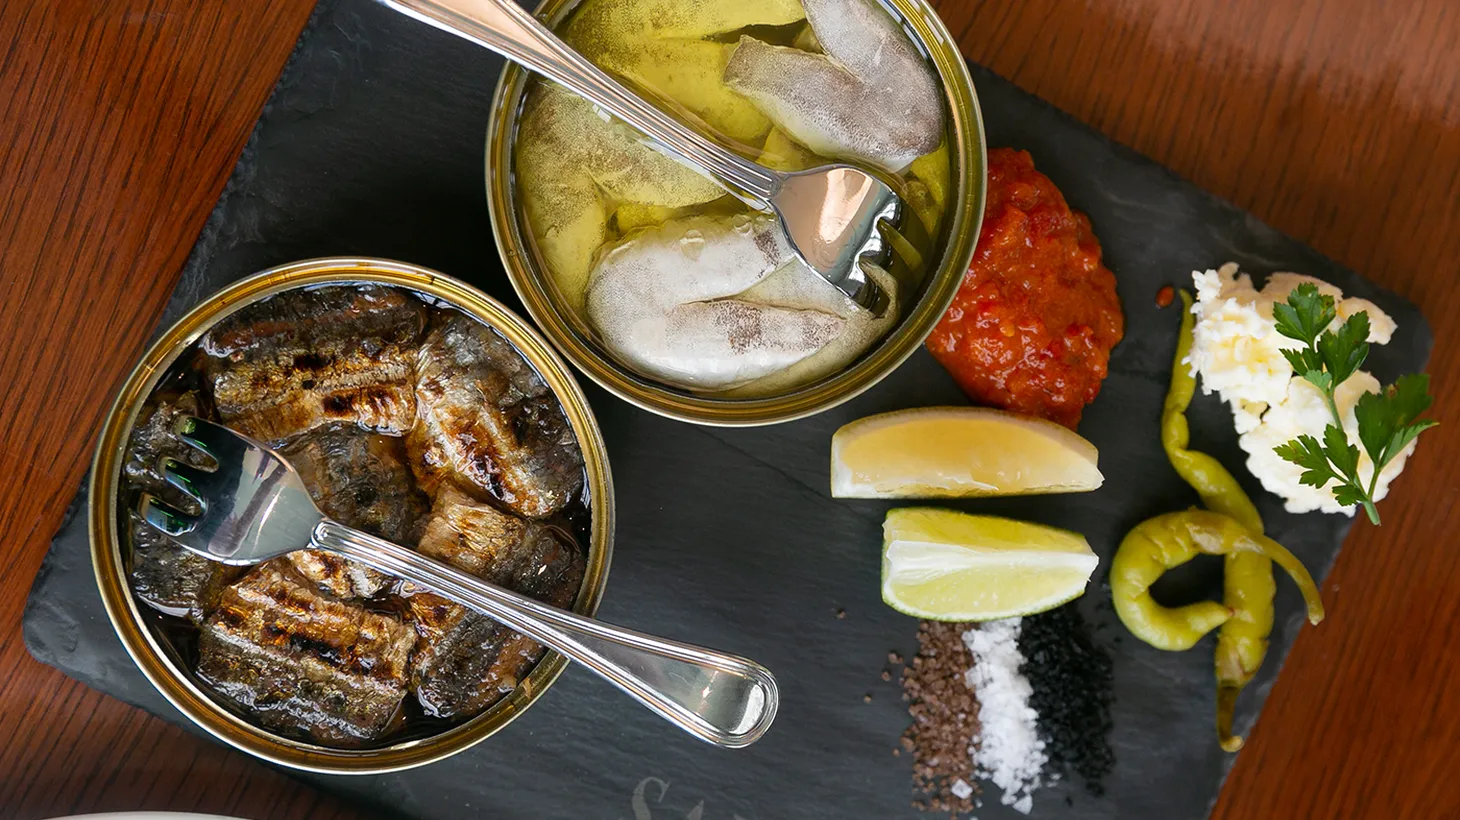 The tinned fish at Saltie Girl is served with salts, butter, lemon, and housemade piquillo pepper jam.